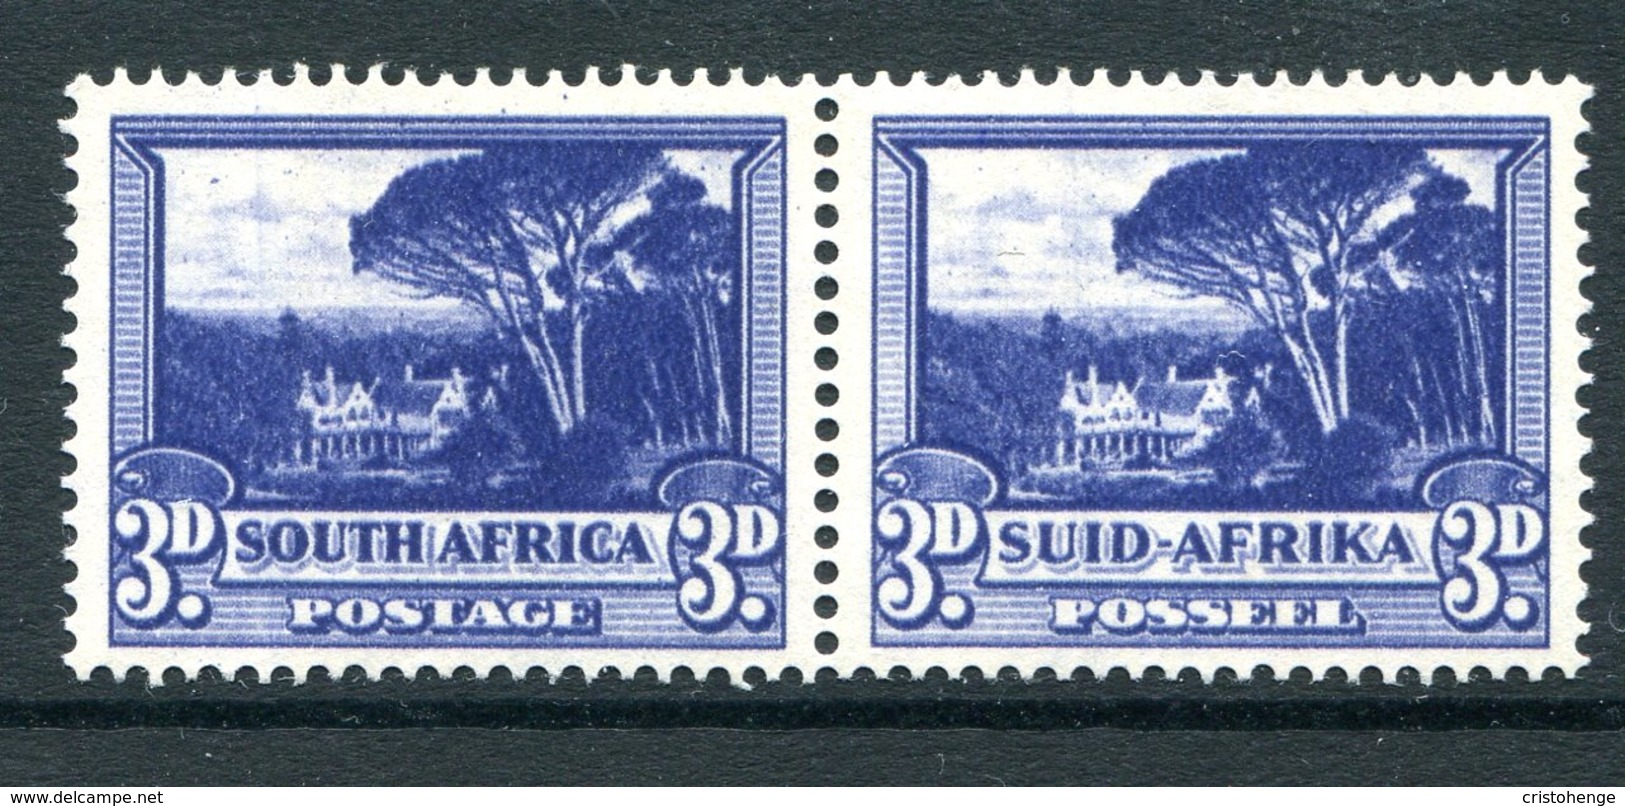 South Africa 1947-54 Screened Printing - 3d Groot Schuur - Blue - HM (SG 117a) - Unused Stamps